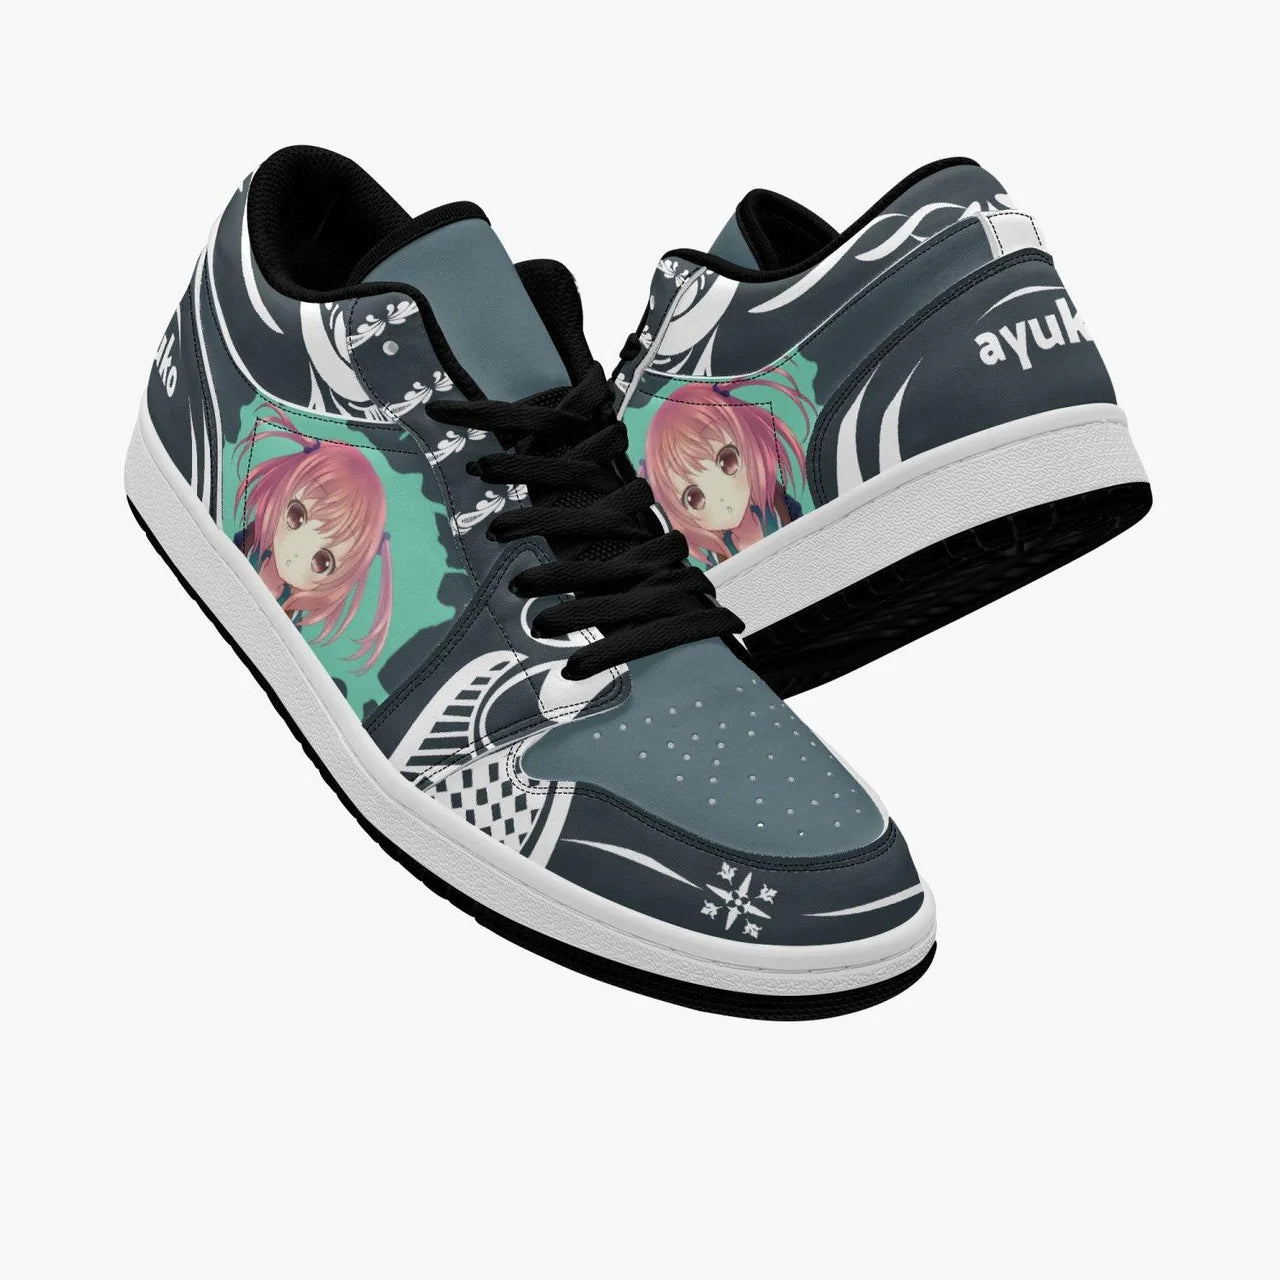 Footwear for the Anime Lover's Soul: Discover AyukoShop